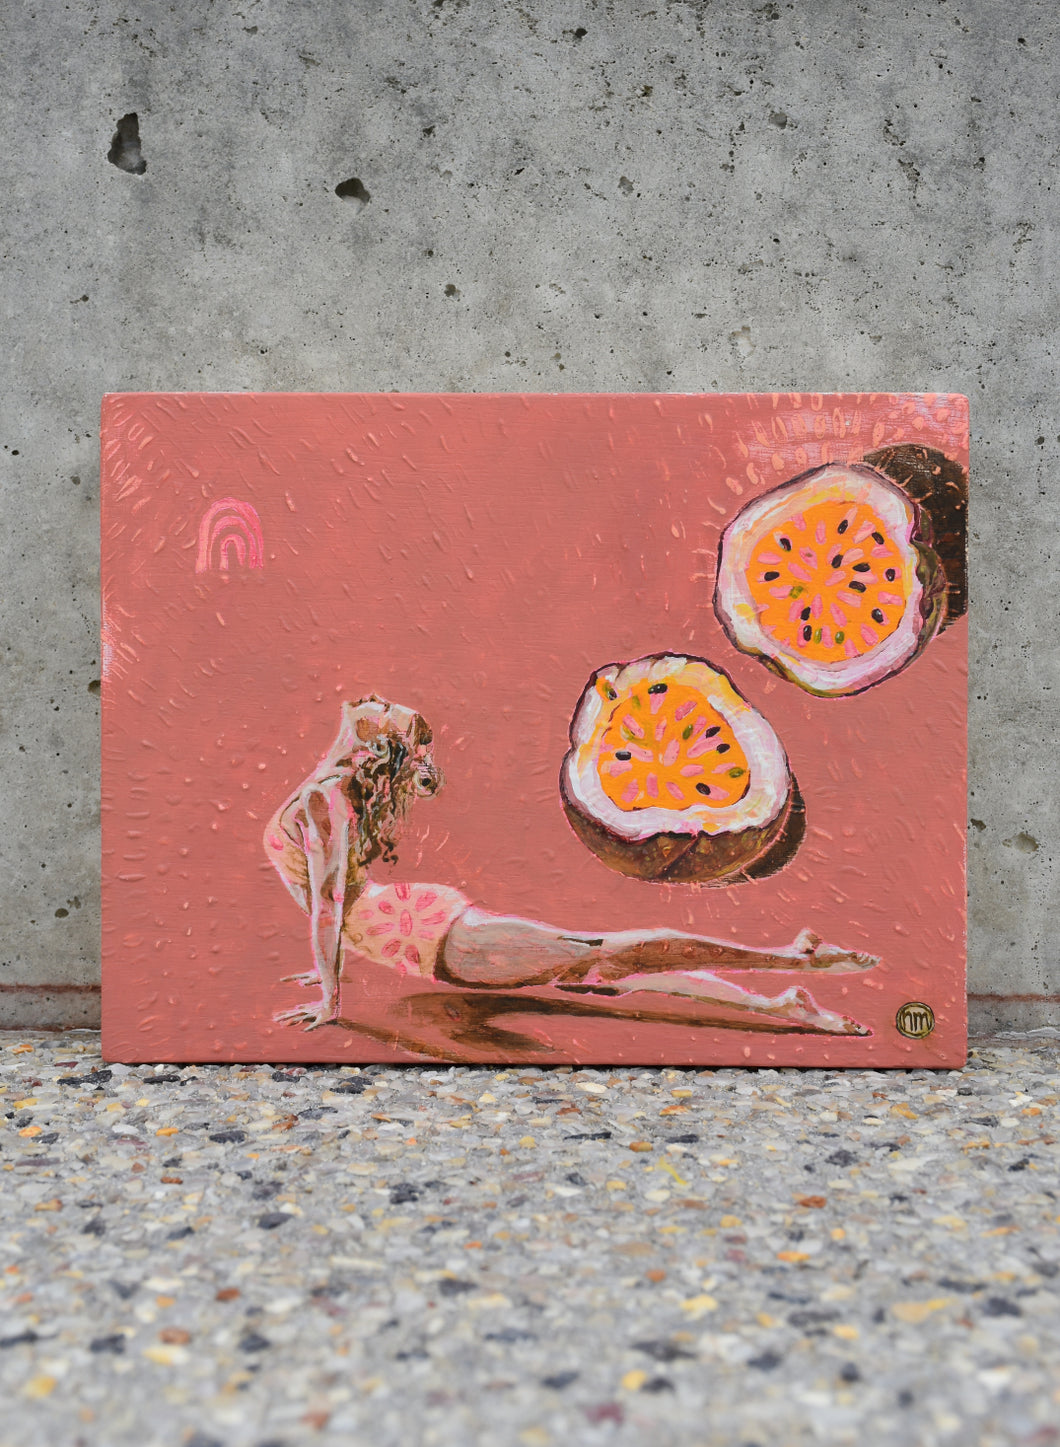 Woman in up dog heart opener yoga pose under a passion fruit cut in half. An original painting by West Australian artist Natasha Mott.